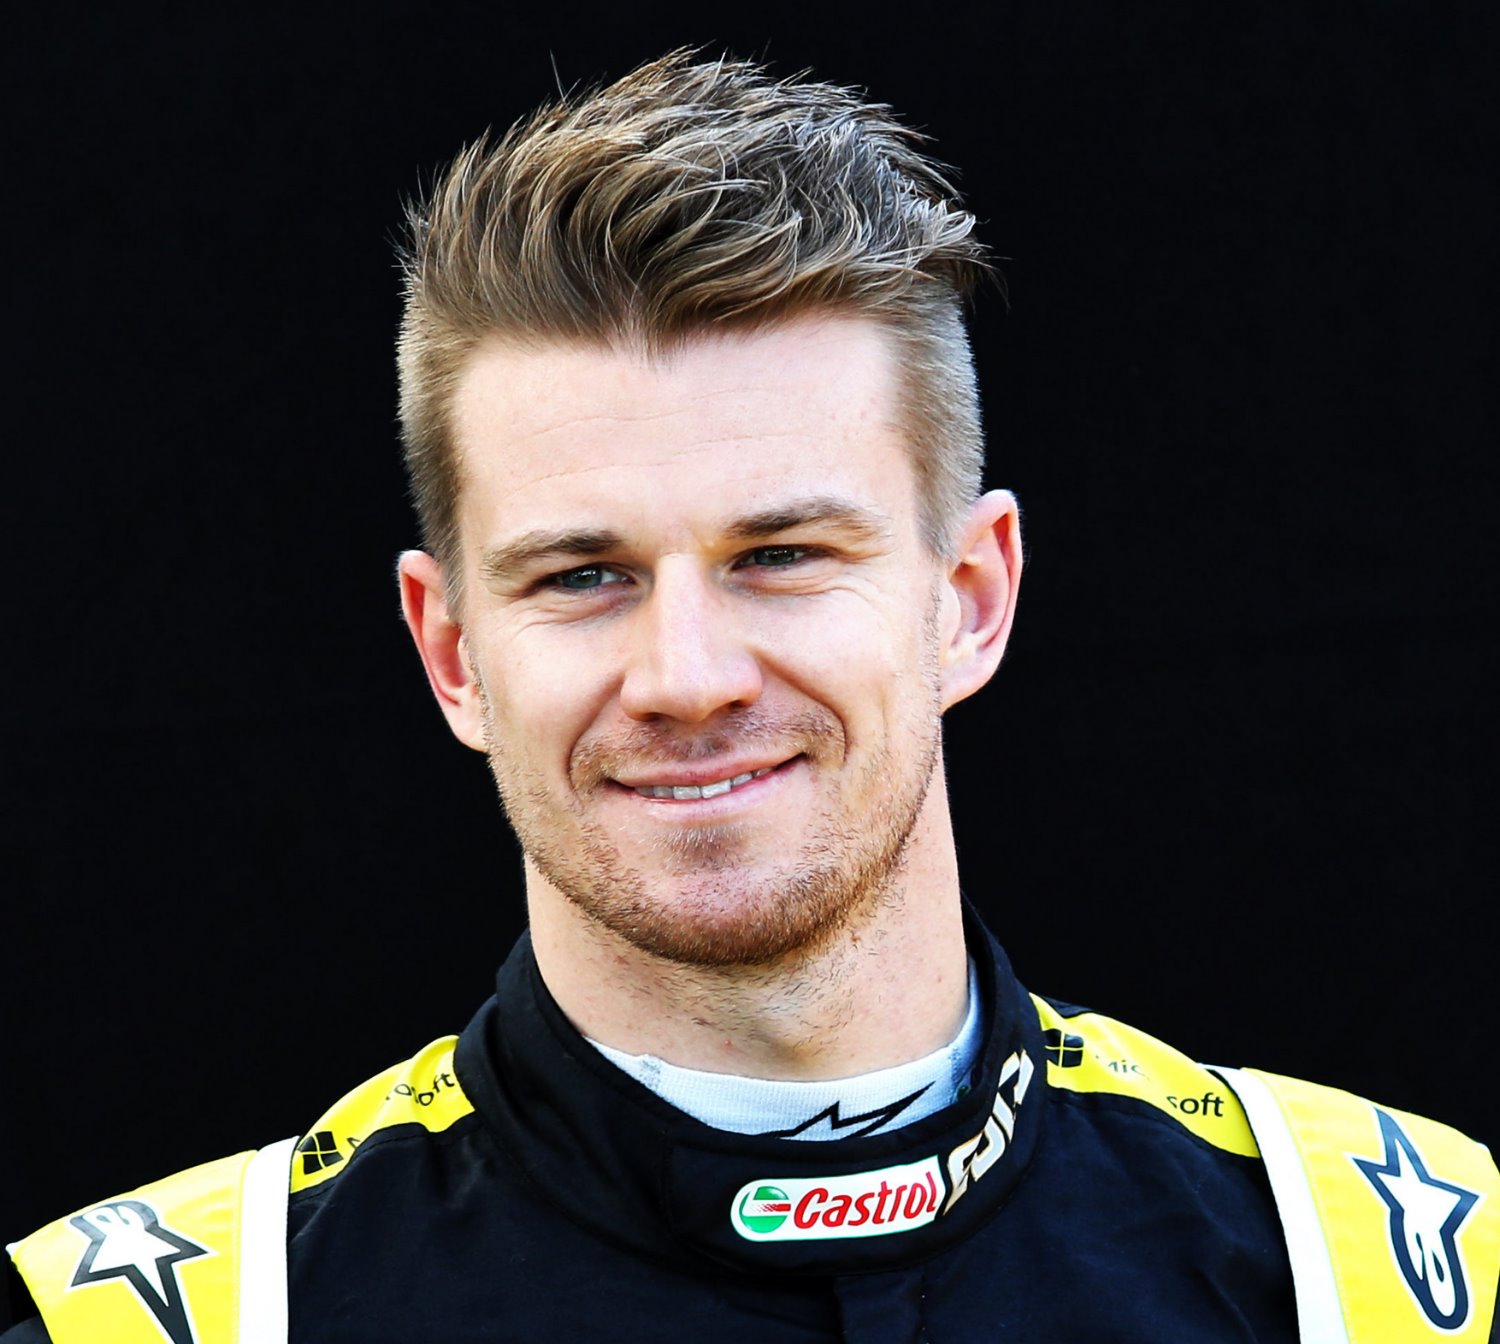 Hulkenberg could drive the IndyCar road courses and Ed Carpenter the ovals but the team denies that